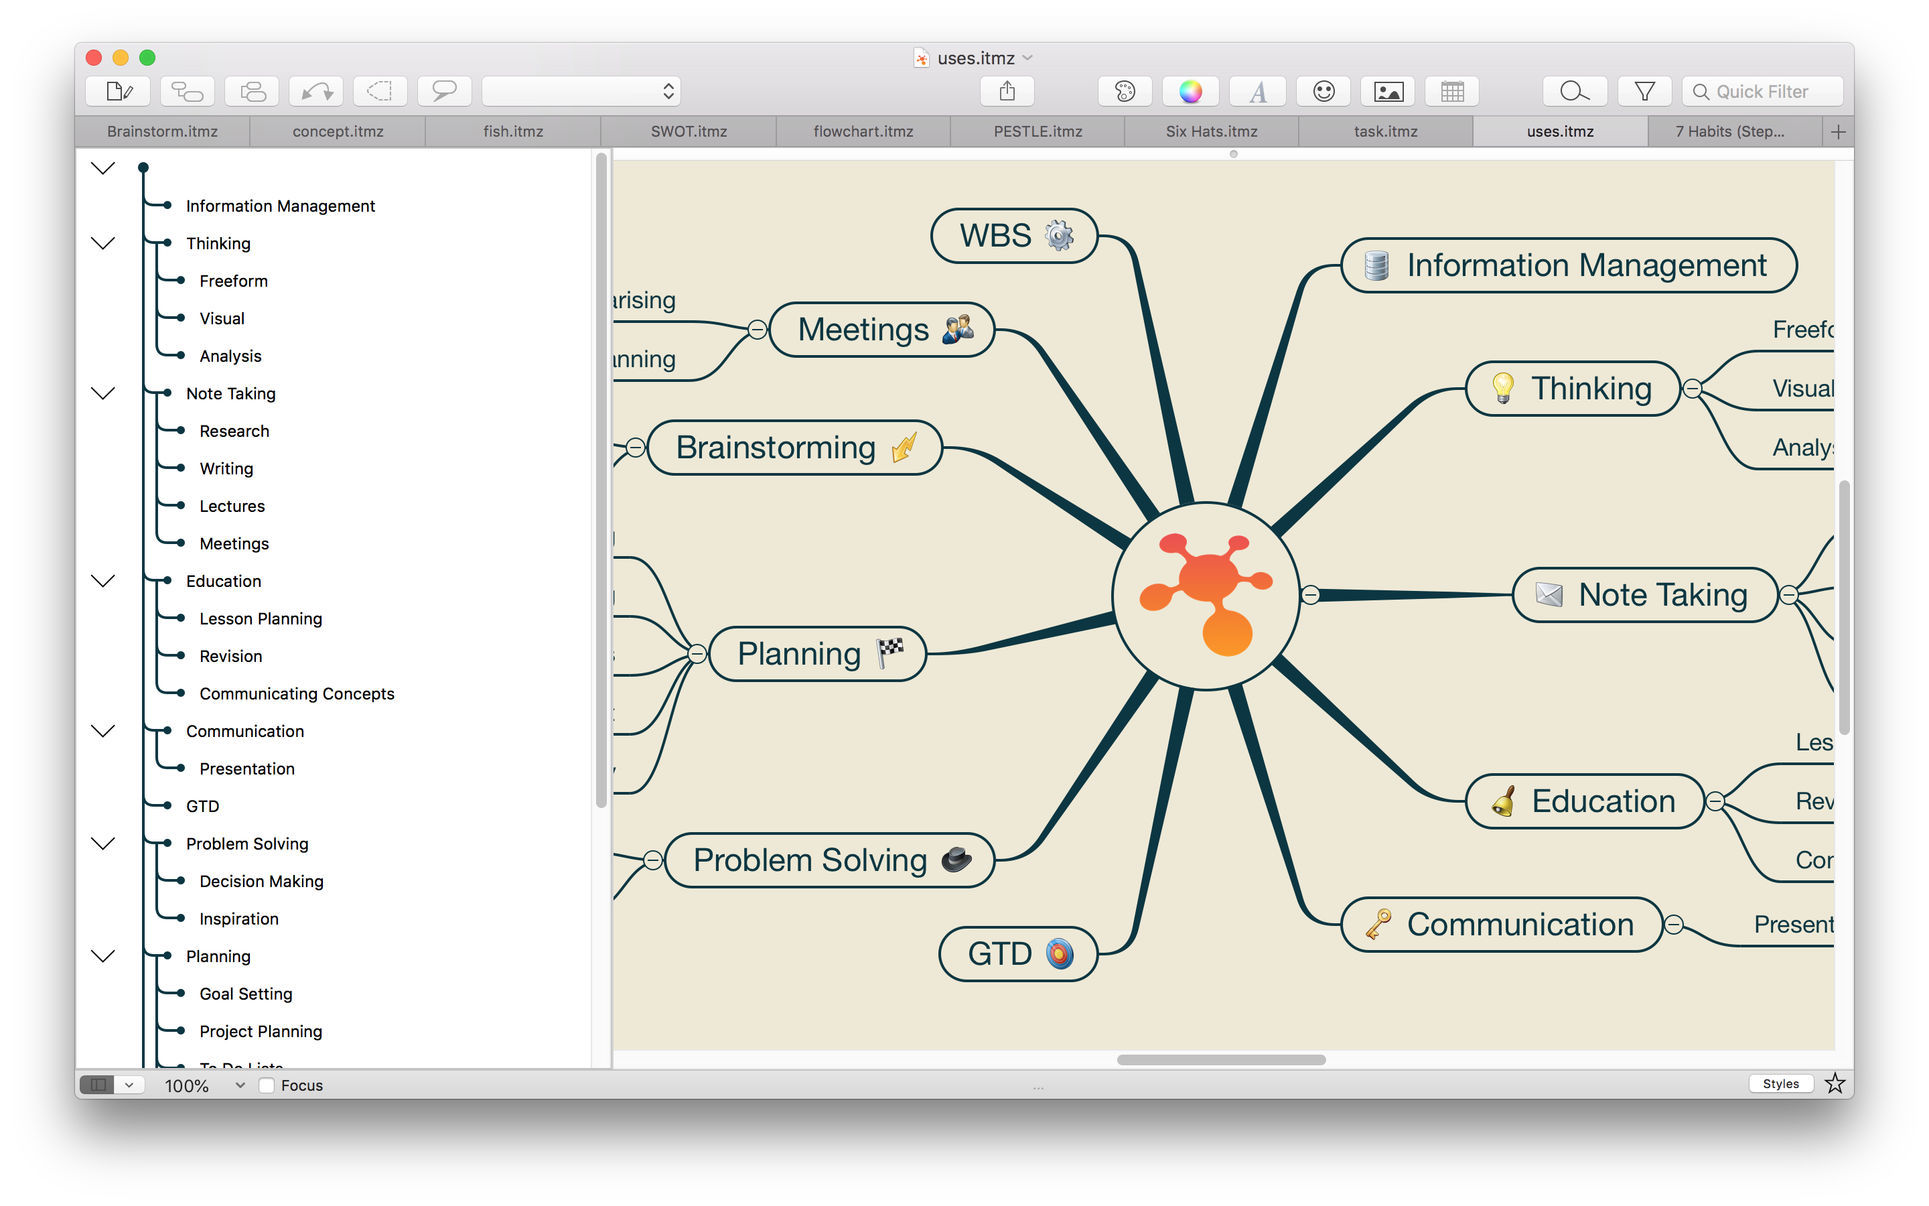 ithoughtsx link to other mindmap